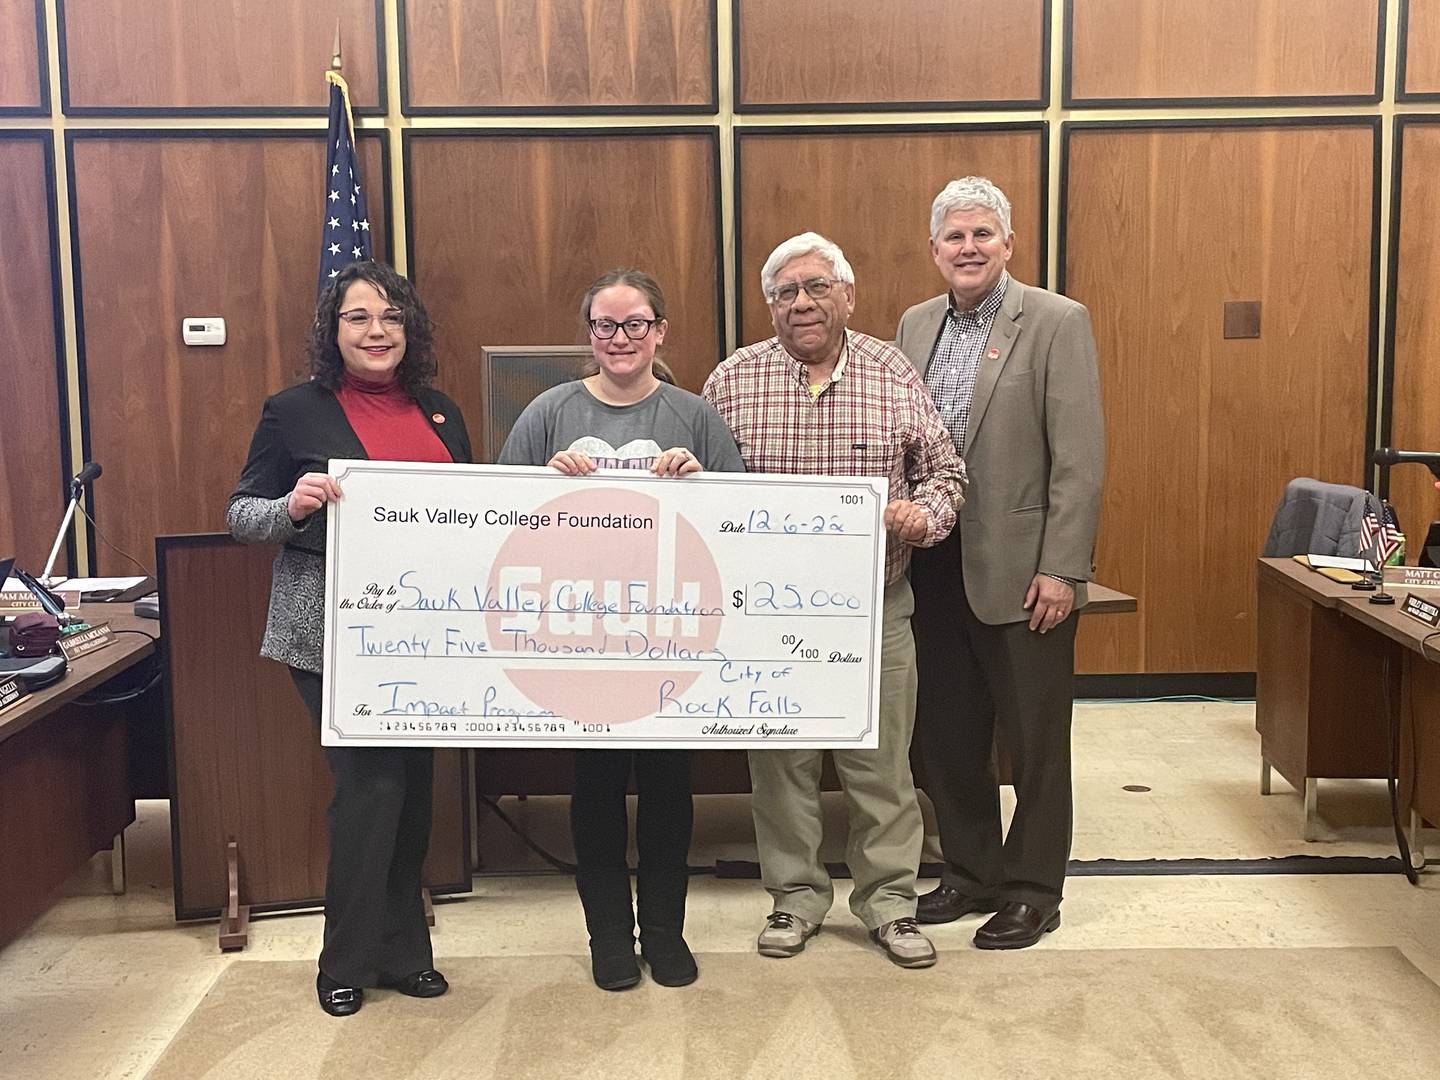 The Rock Falls City Council recently approved an economic development donation to the SVCC Impact Program of $25,000 from their APRA funds. Rock Falls is now the second local government entity to invest in the area's largest workforce training system